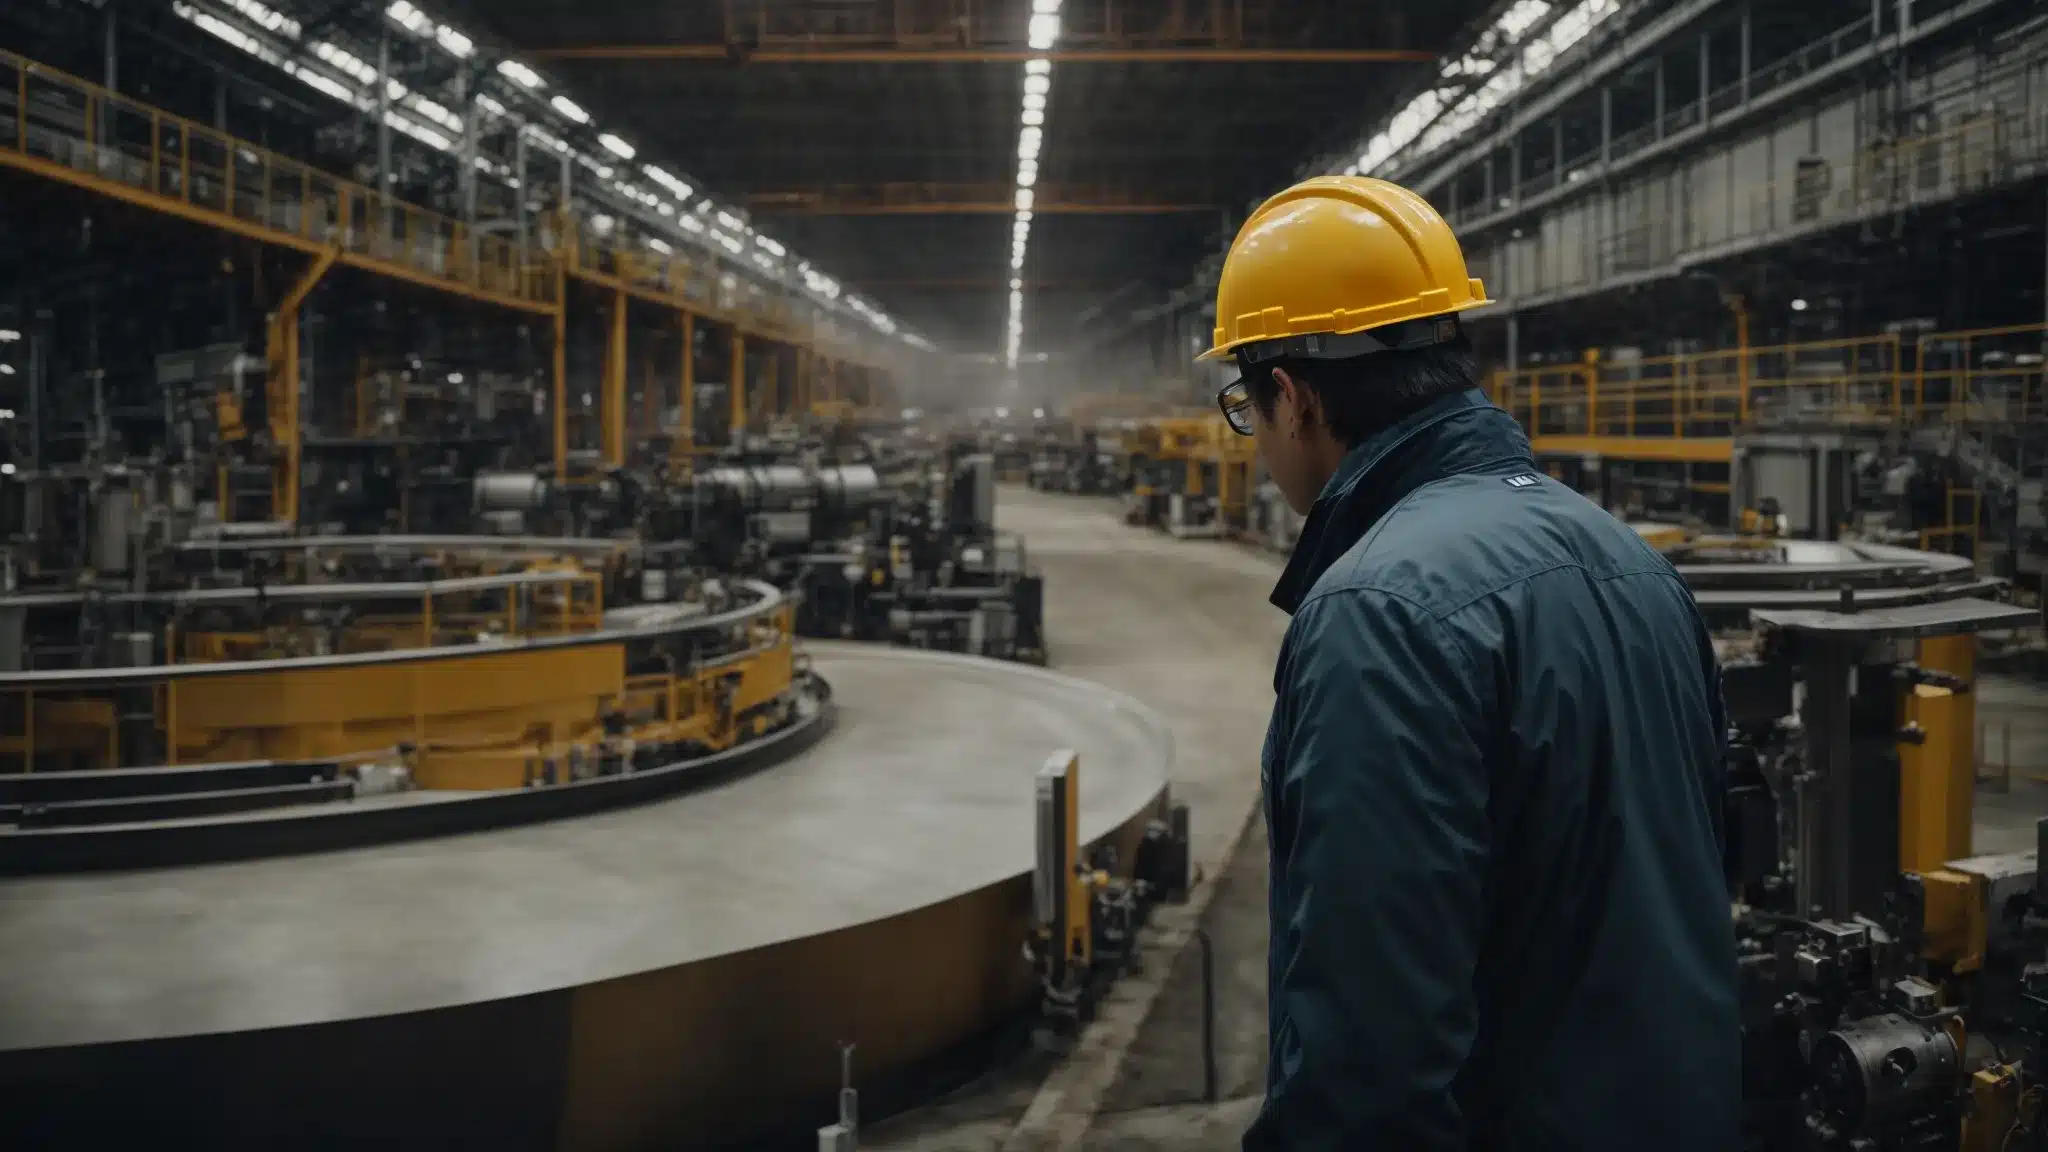 A Professional In A Hard Hat Inspects Machinery In A Spacious, Well-Organized Factory.